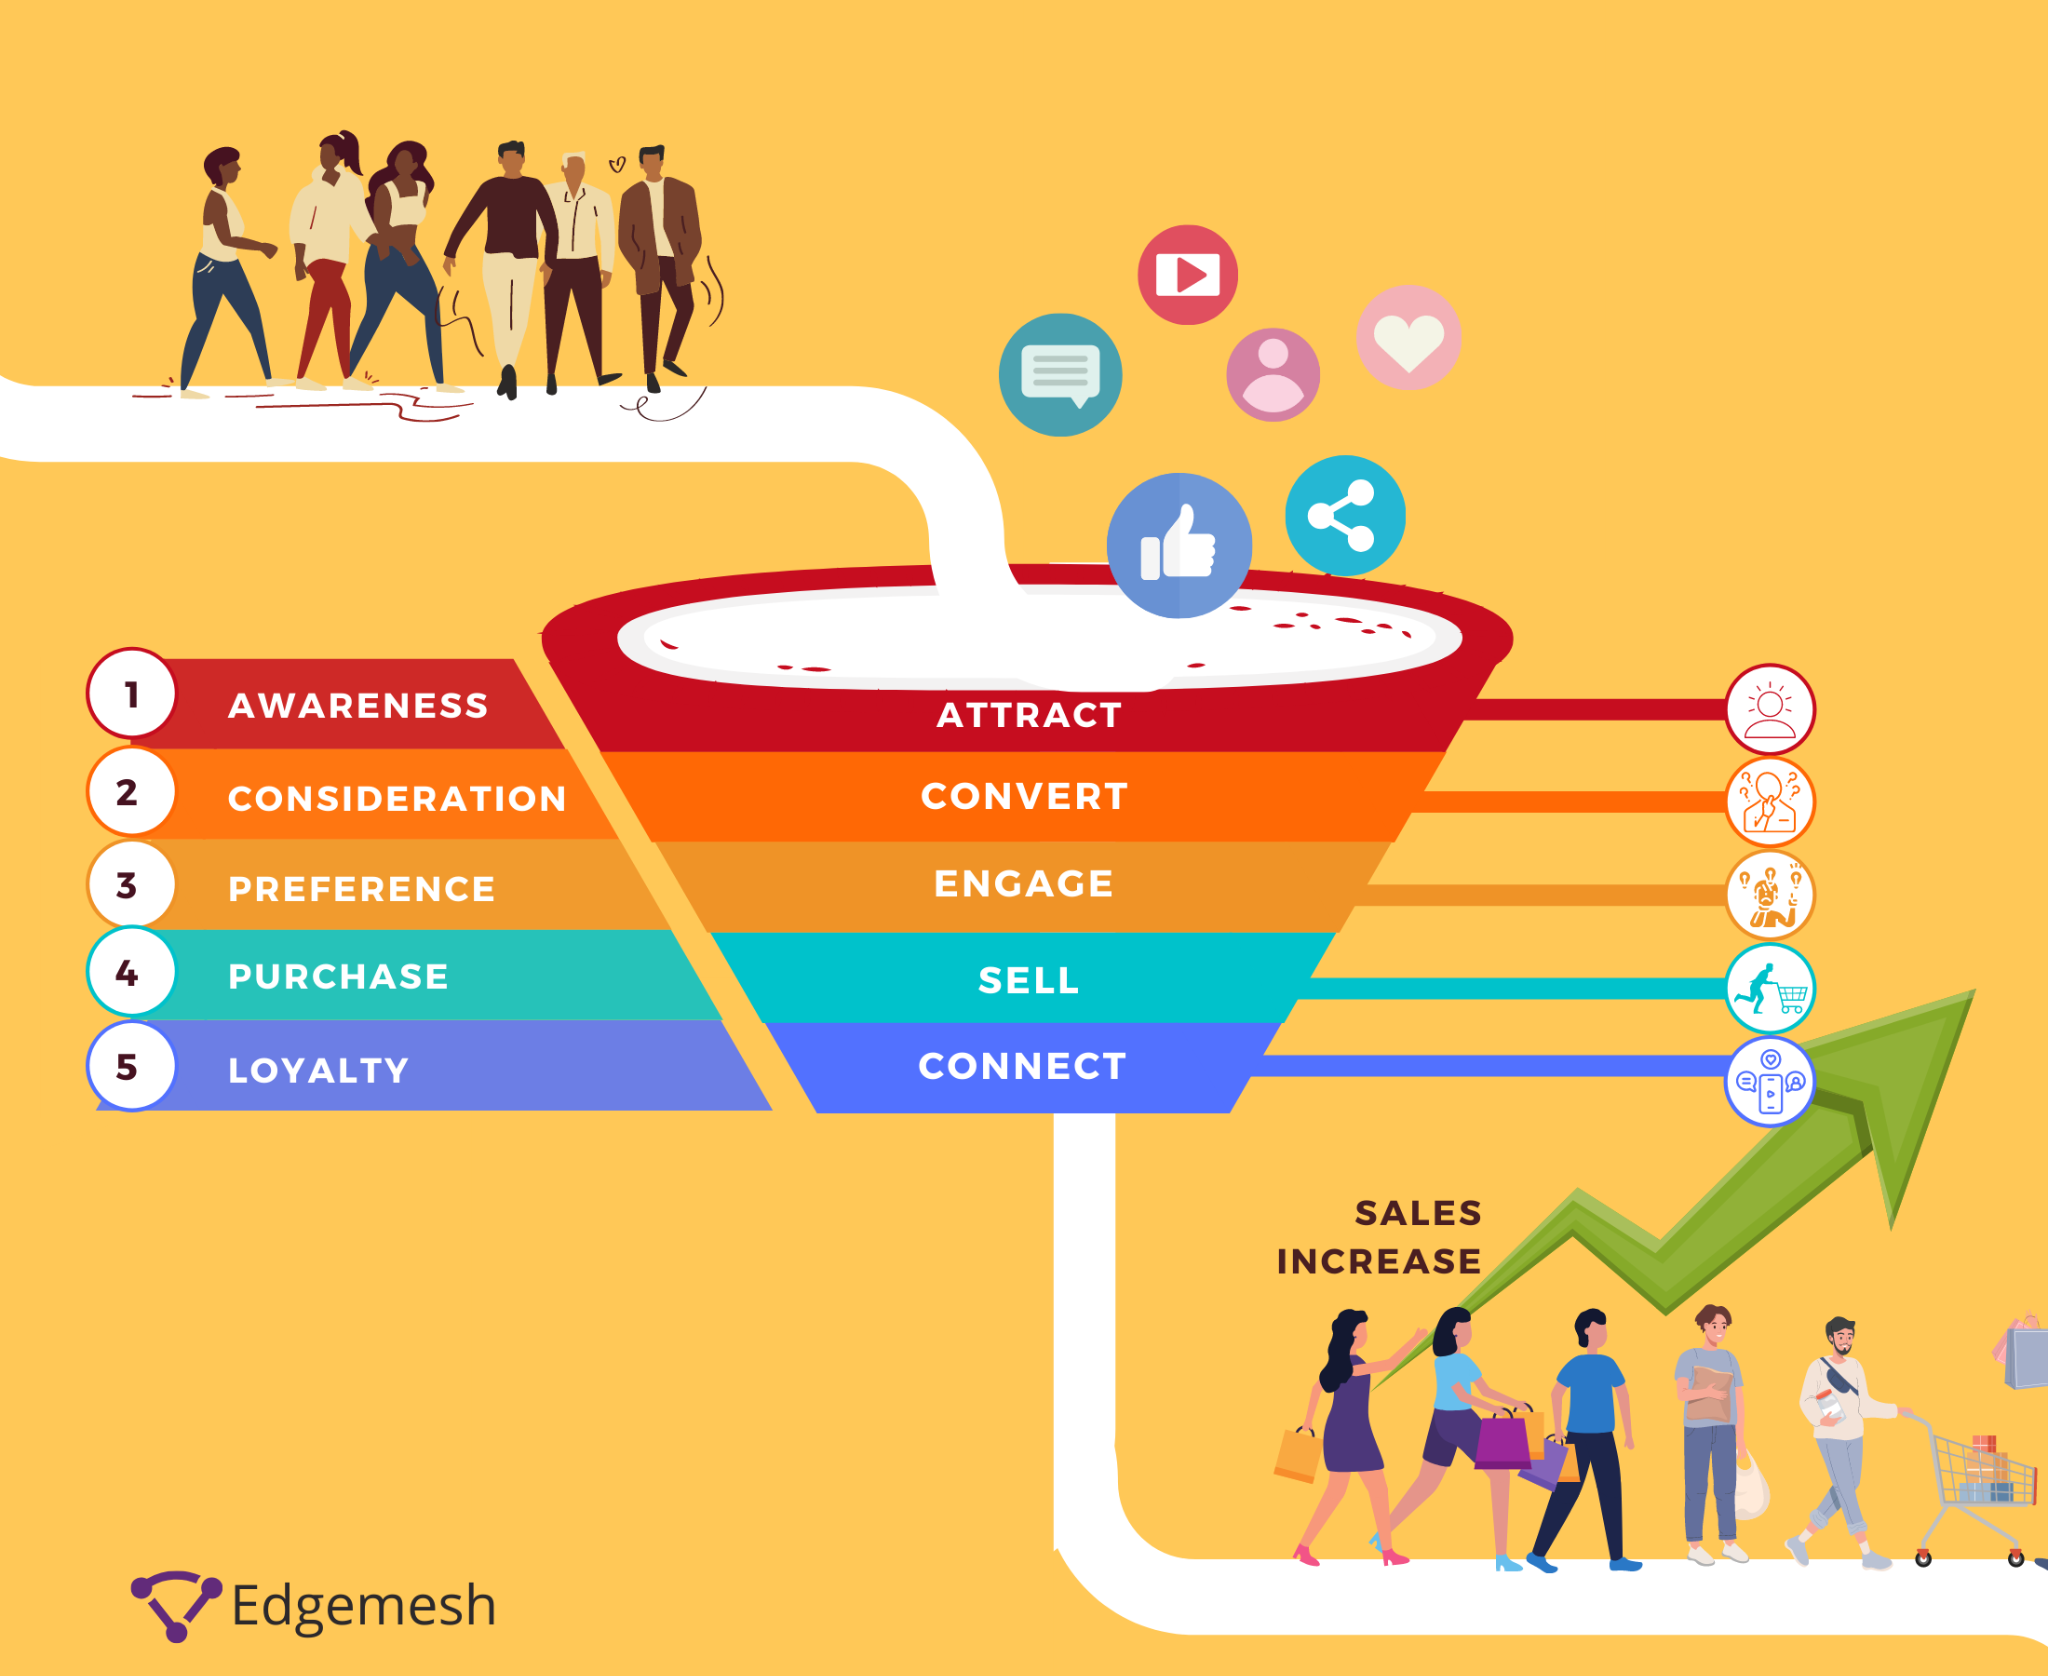 Customers moving through the acquisition funnel of a business